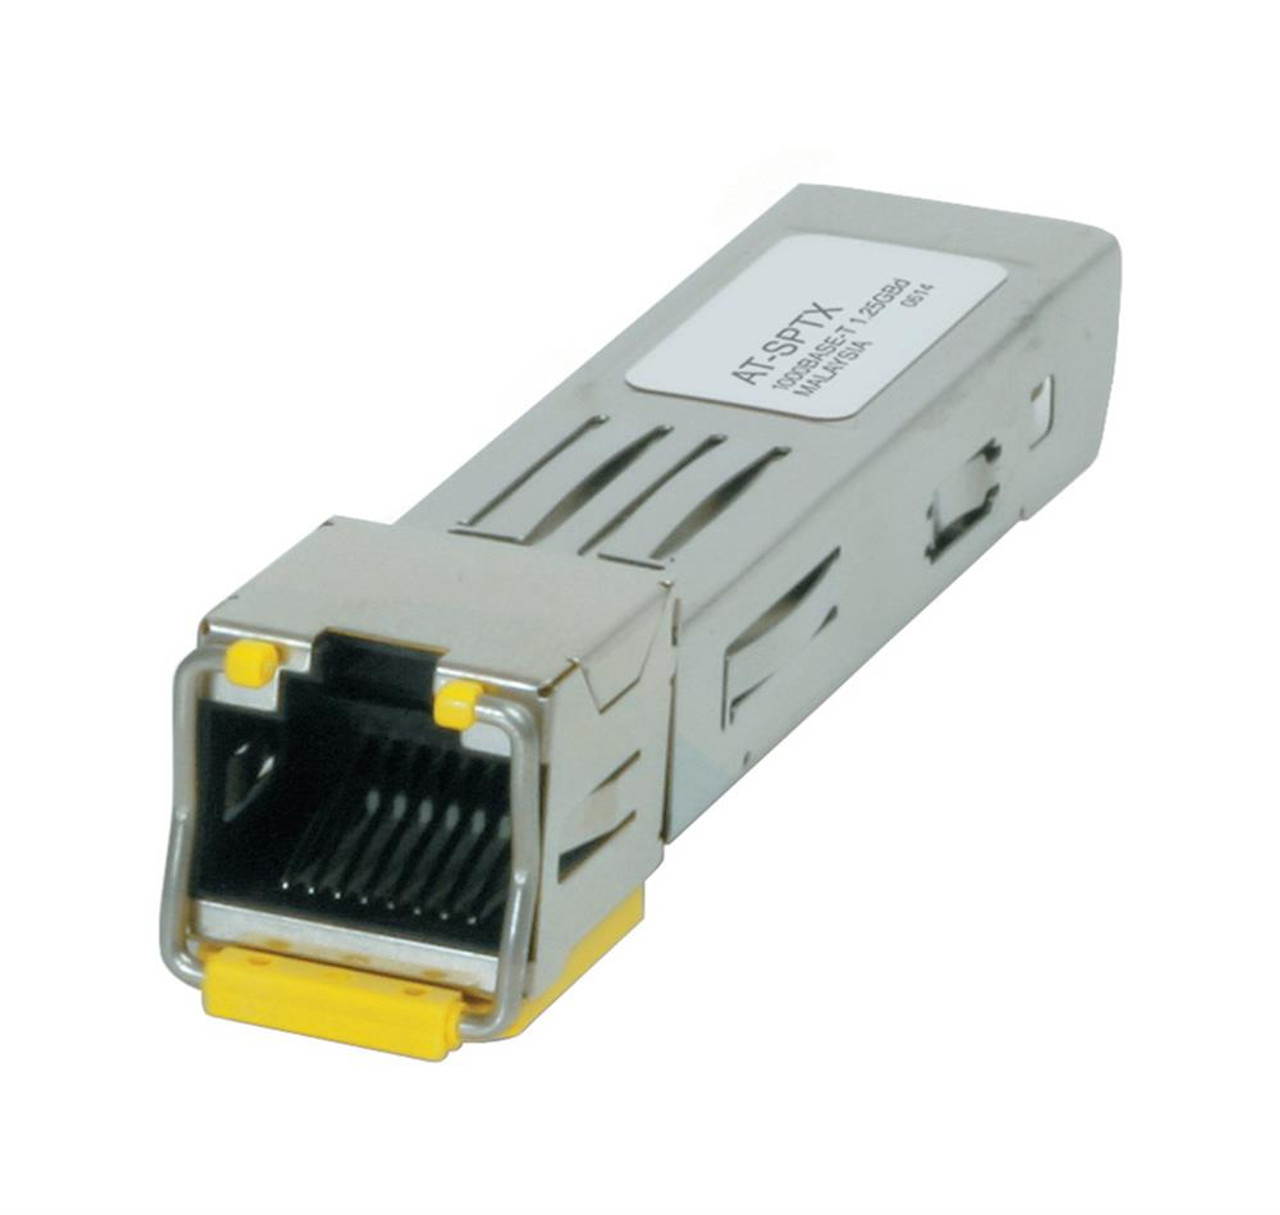 AT-SPTX-ACC Accortec 1.25Gbps 1000Base-T Copper 100m RJ-45 Connector SFP Transceiver Module for Allied Telesis Compatible